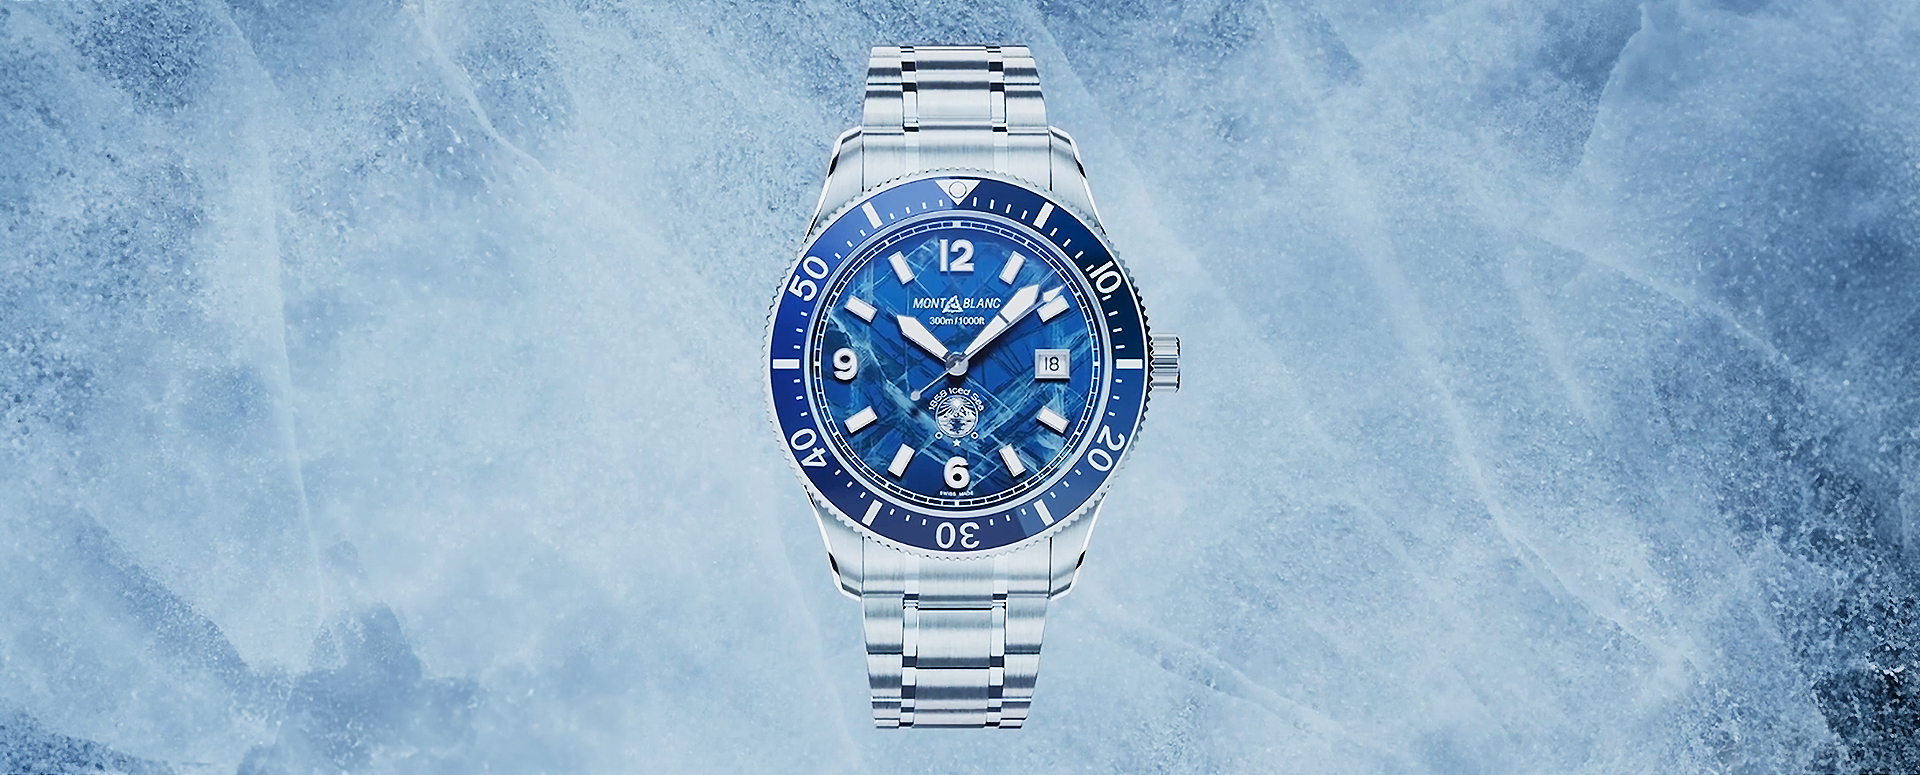 MONTBLANC: 1858 ICED SEA AUTOMATIC DATE